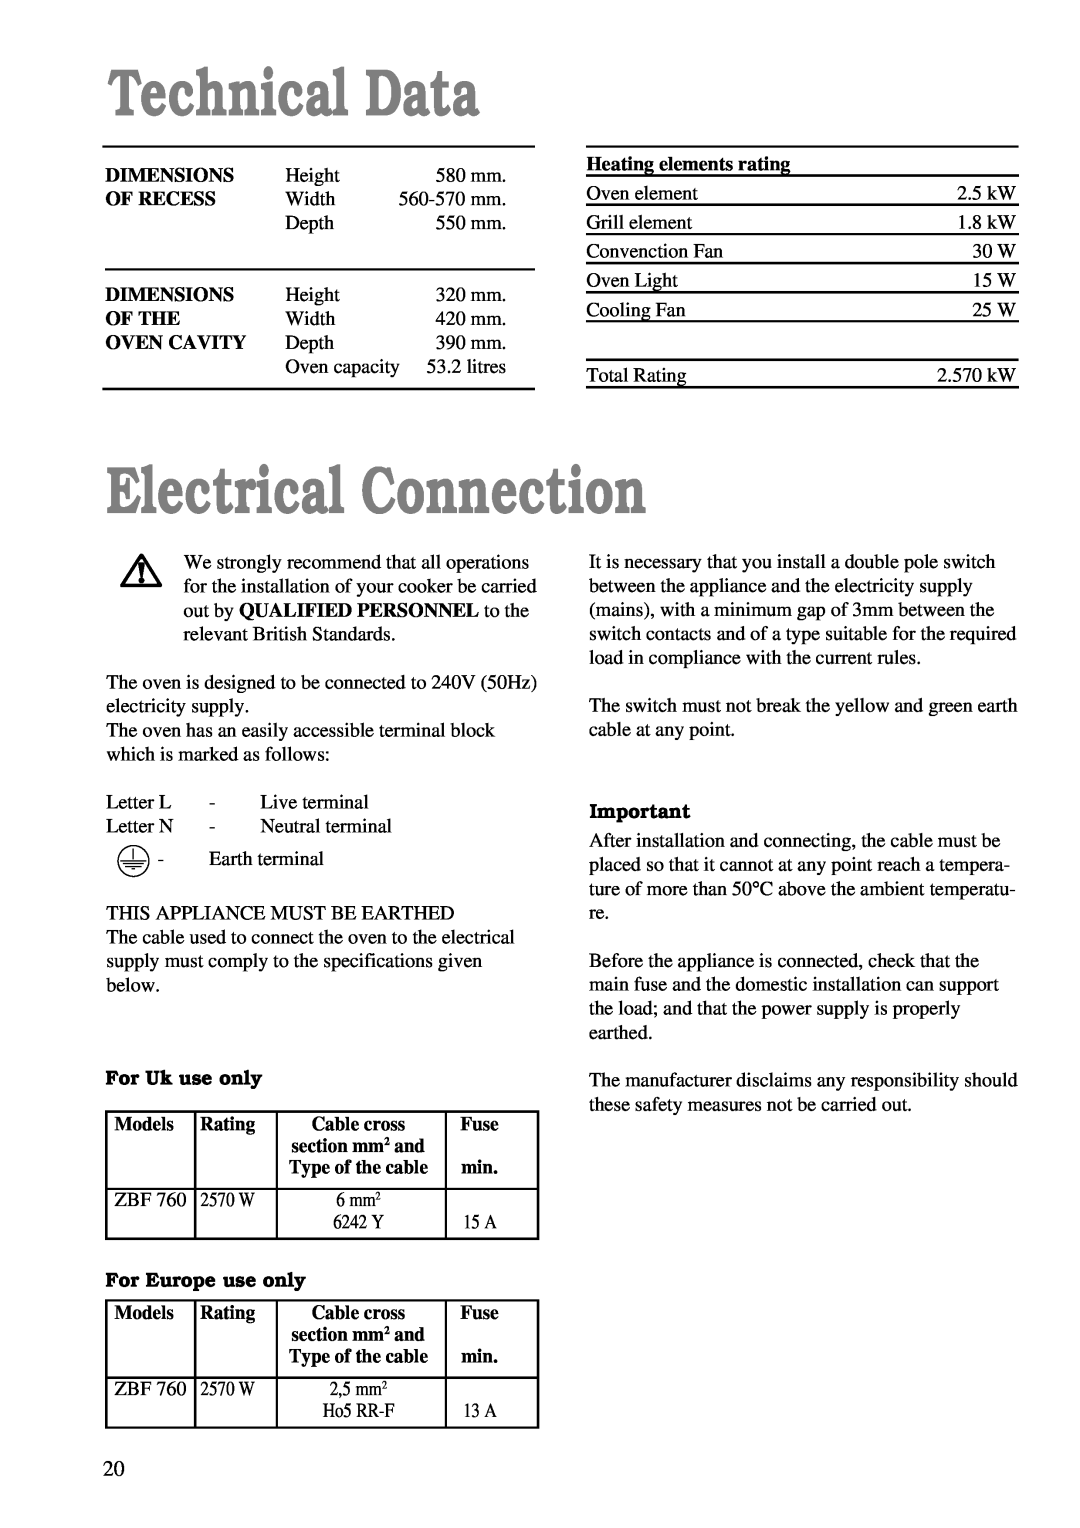 Zanussi ZBF 760 Technical Data, Electrical Connection, Dimensions, Of Recess, Of The, Oven Cavity, Heating elements rating 